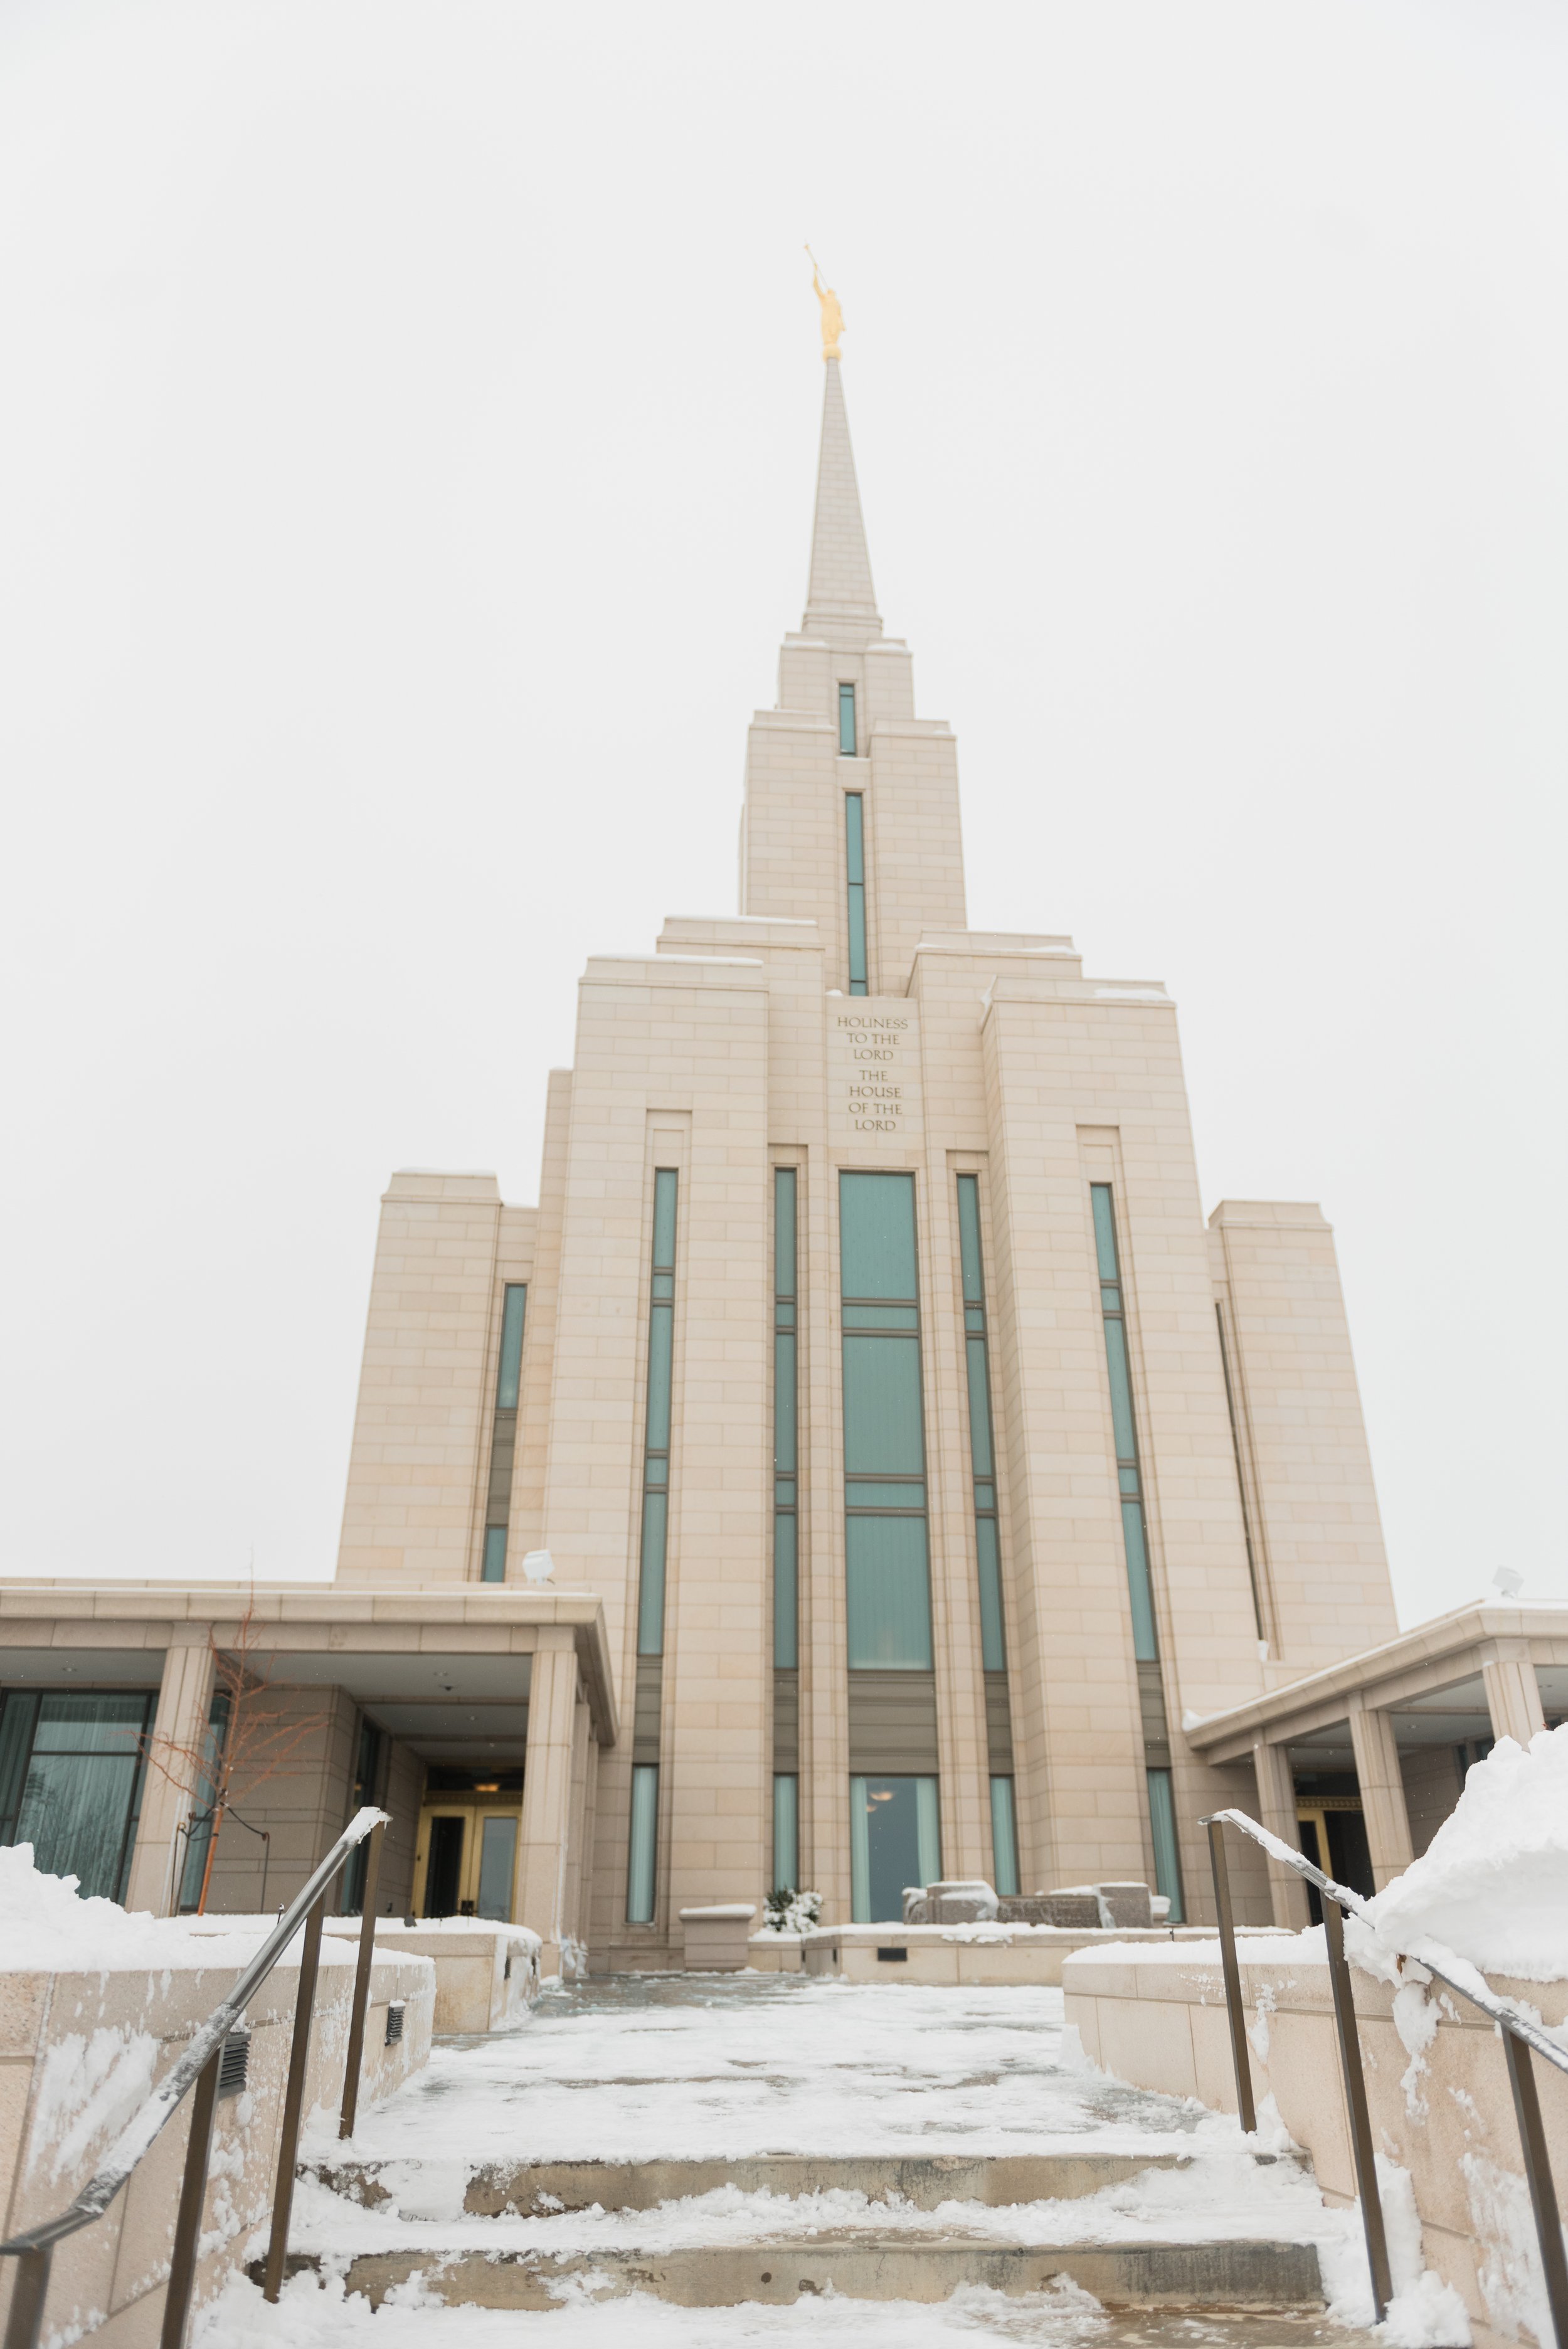  The Rexburg, Idaho LDS Temple stands tall while surrounded by glistening snow captured by wedding photographer, Jacquie Erickson. Wedding temple photos Snowy wedding wedding photography timeline&nbsp; #weddingphotographytimeline #stressfreeweddingda